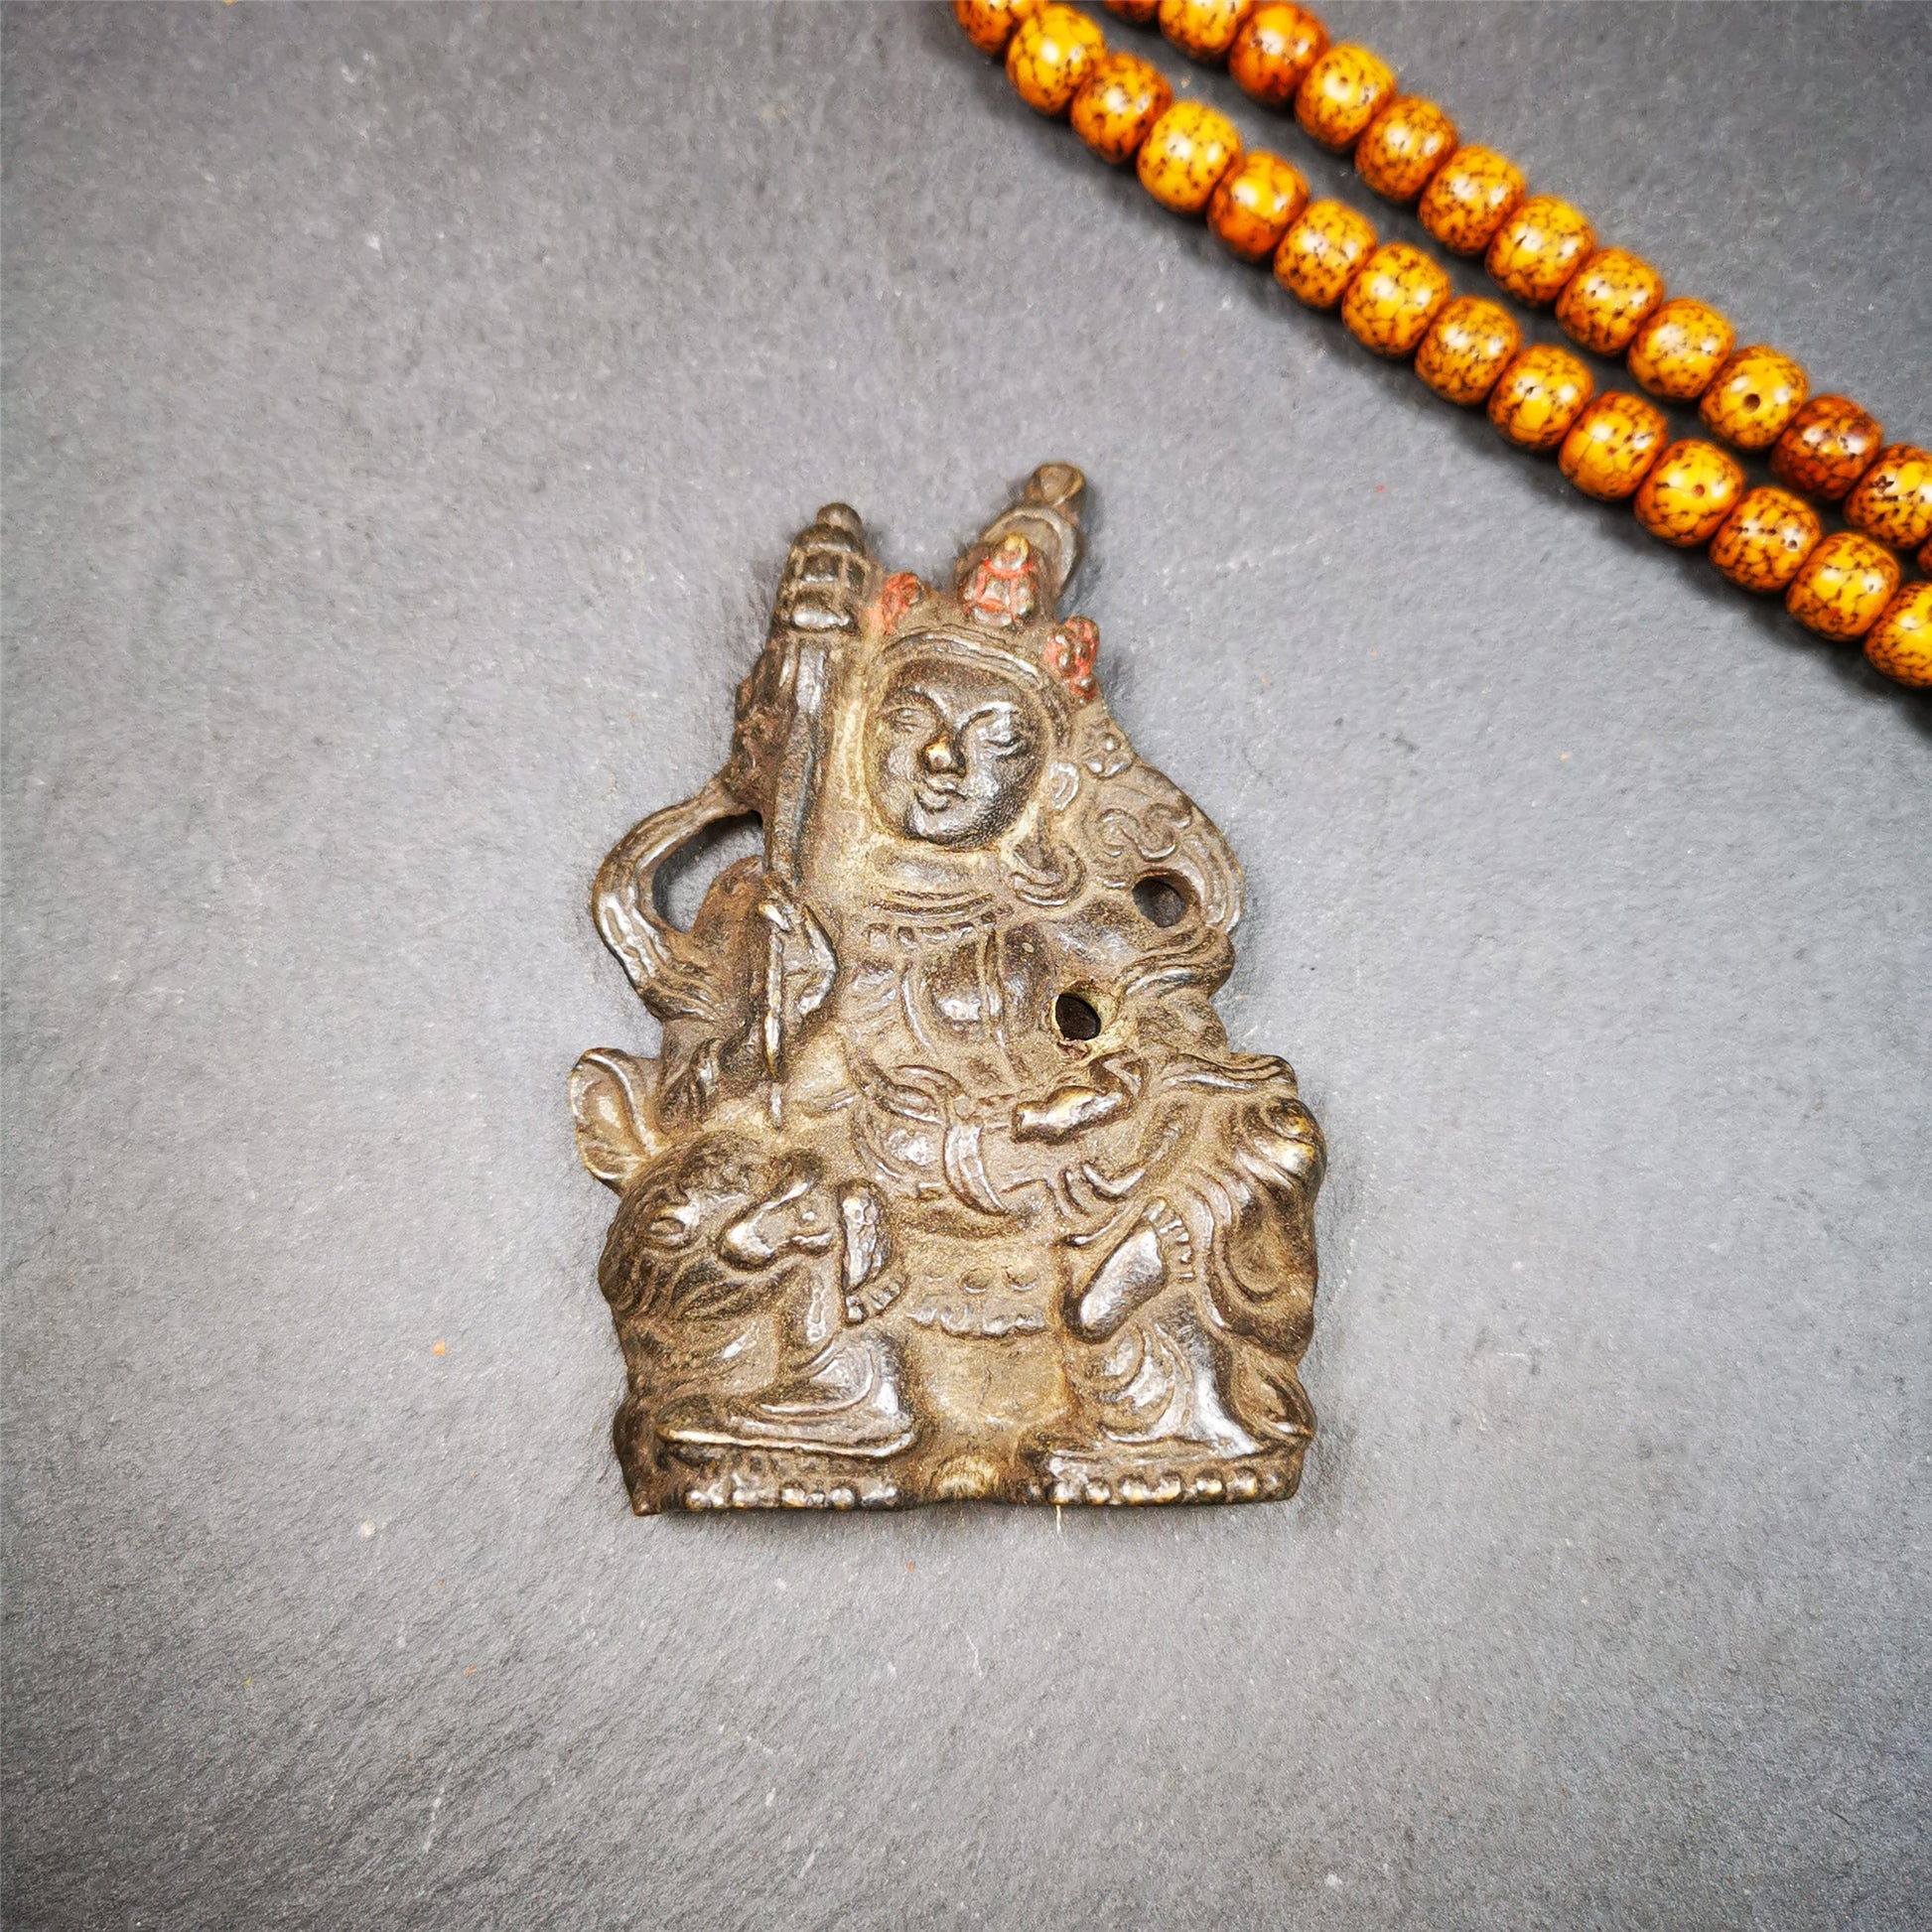 This Vaisravana statue was collected from Samye Monastray, the first monastery in Tibet,and important Nyingma monsatery. It's an old-fashioned green tara statue,about 60 years old,made of copper and painted with mineral pigments. In Tibet, Vaisravana is considered a lokapala or dharmapala in the retinue of Ratnasambhava.